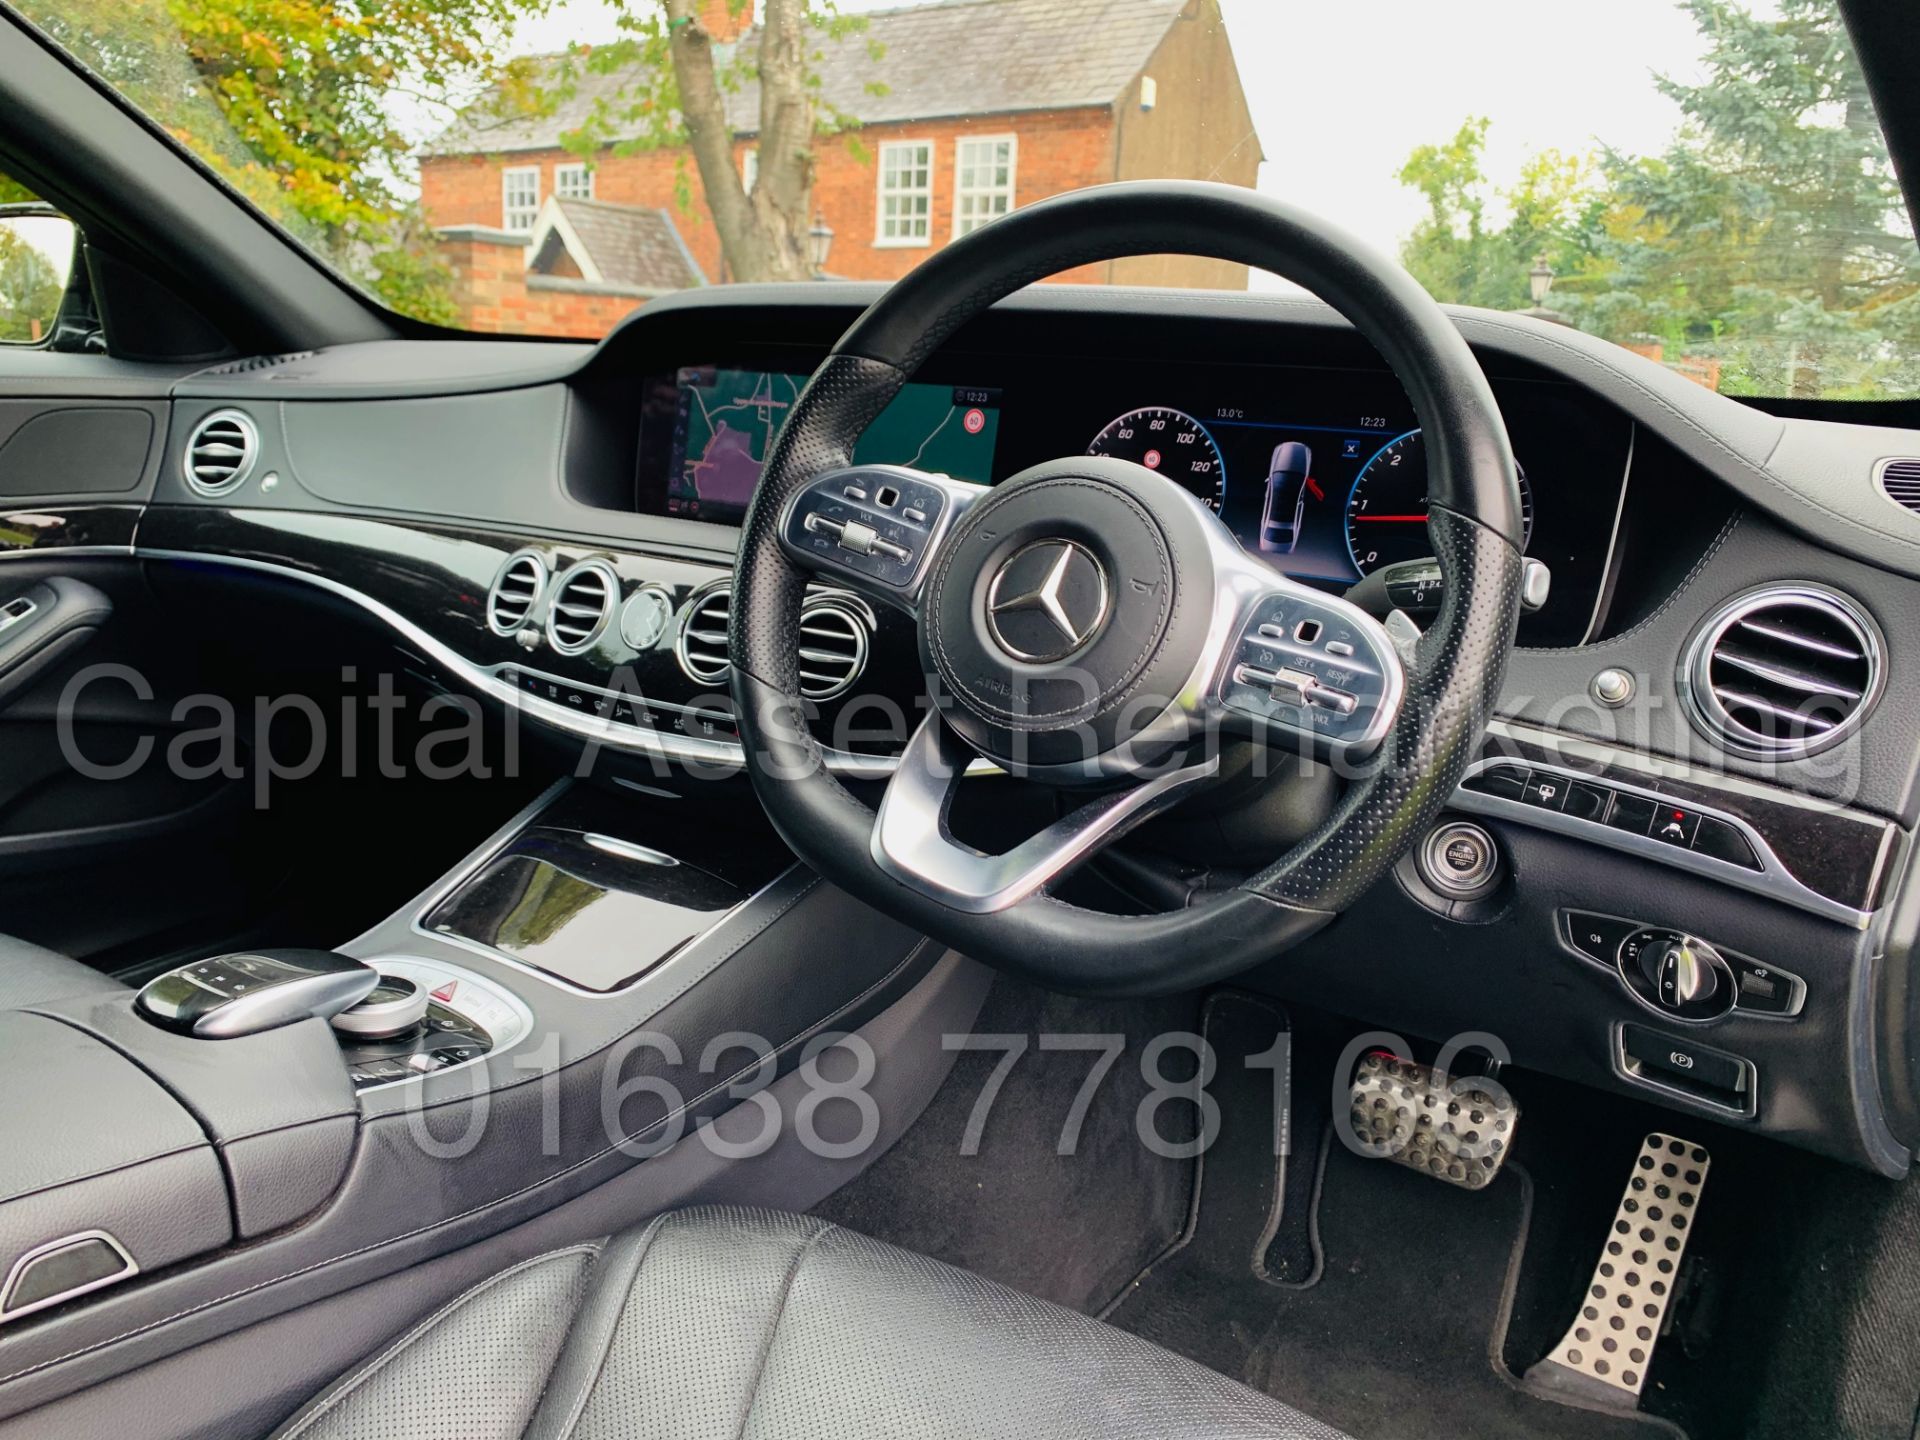 (ON SALE) MERCEDES-BENZ S350D *AMG LINE - SALOON* (2018) 9-G TRONIC - LEATHER - SAT NAV - Image 41 of 172